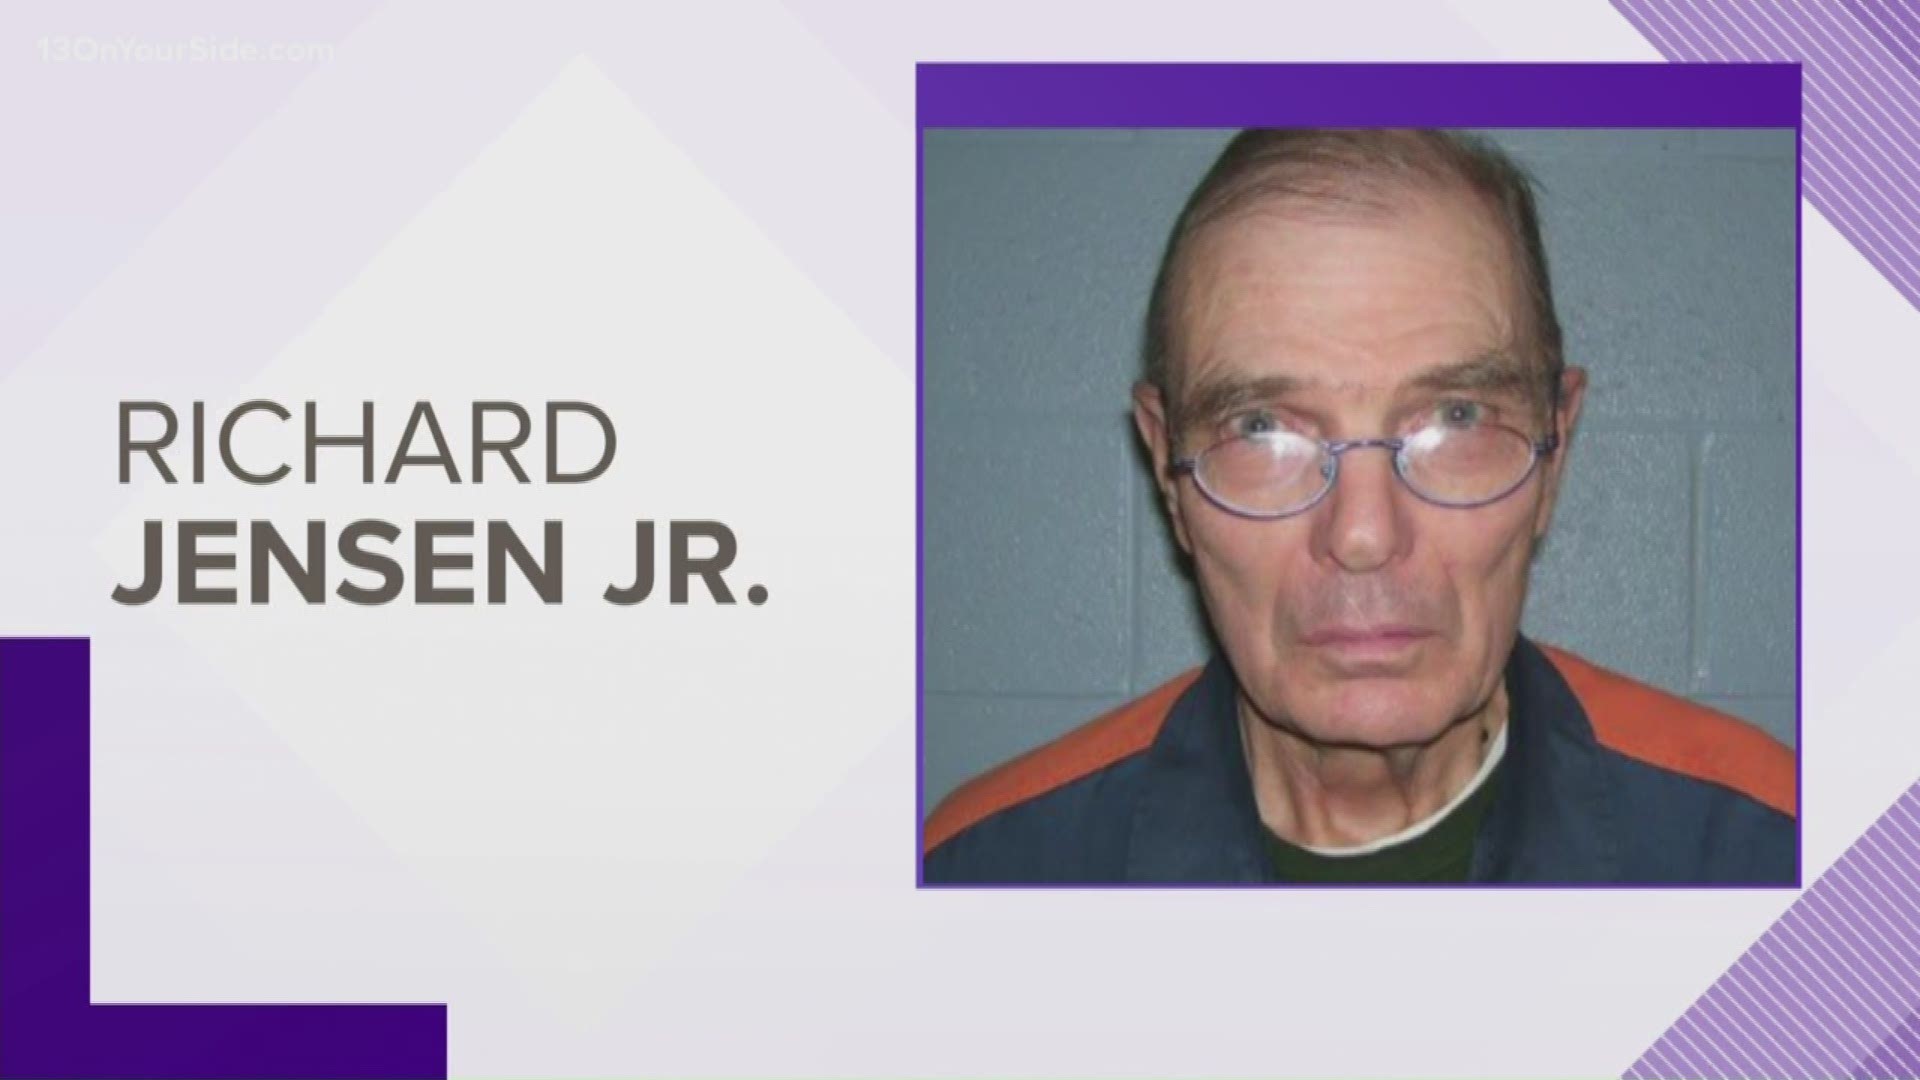 Richard Jensen Jr., who is 72 and reportedly suffering from dementia, was granted parole in a 1991 murder.